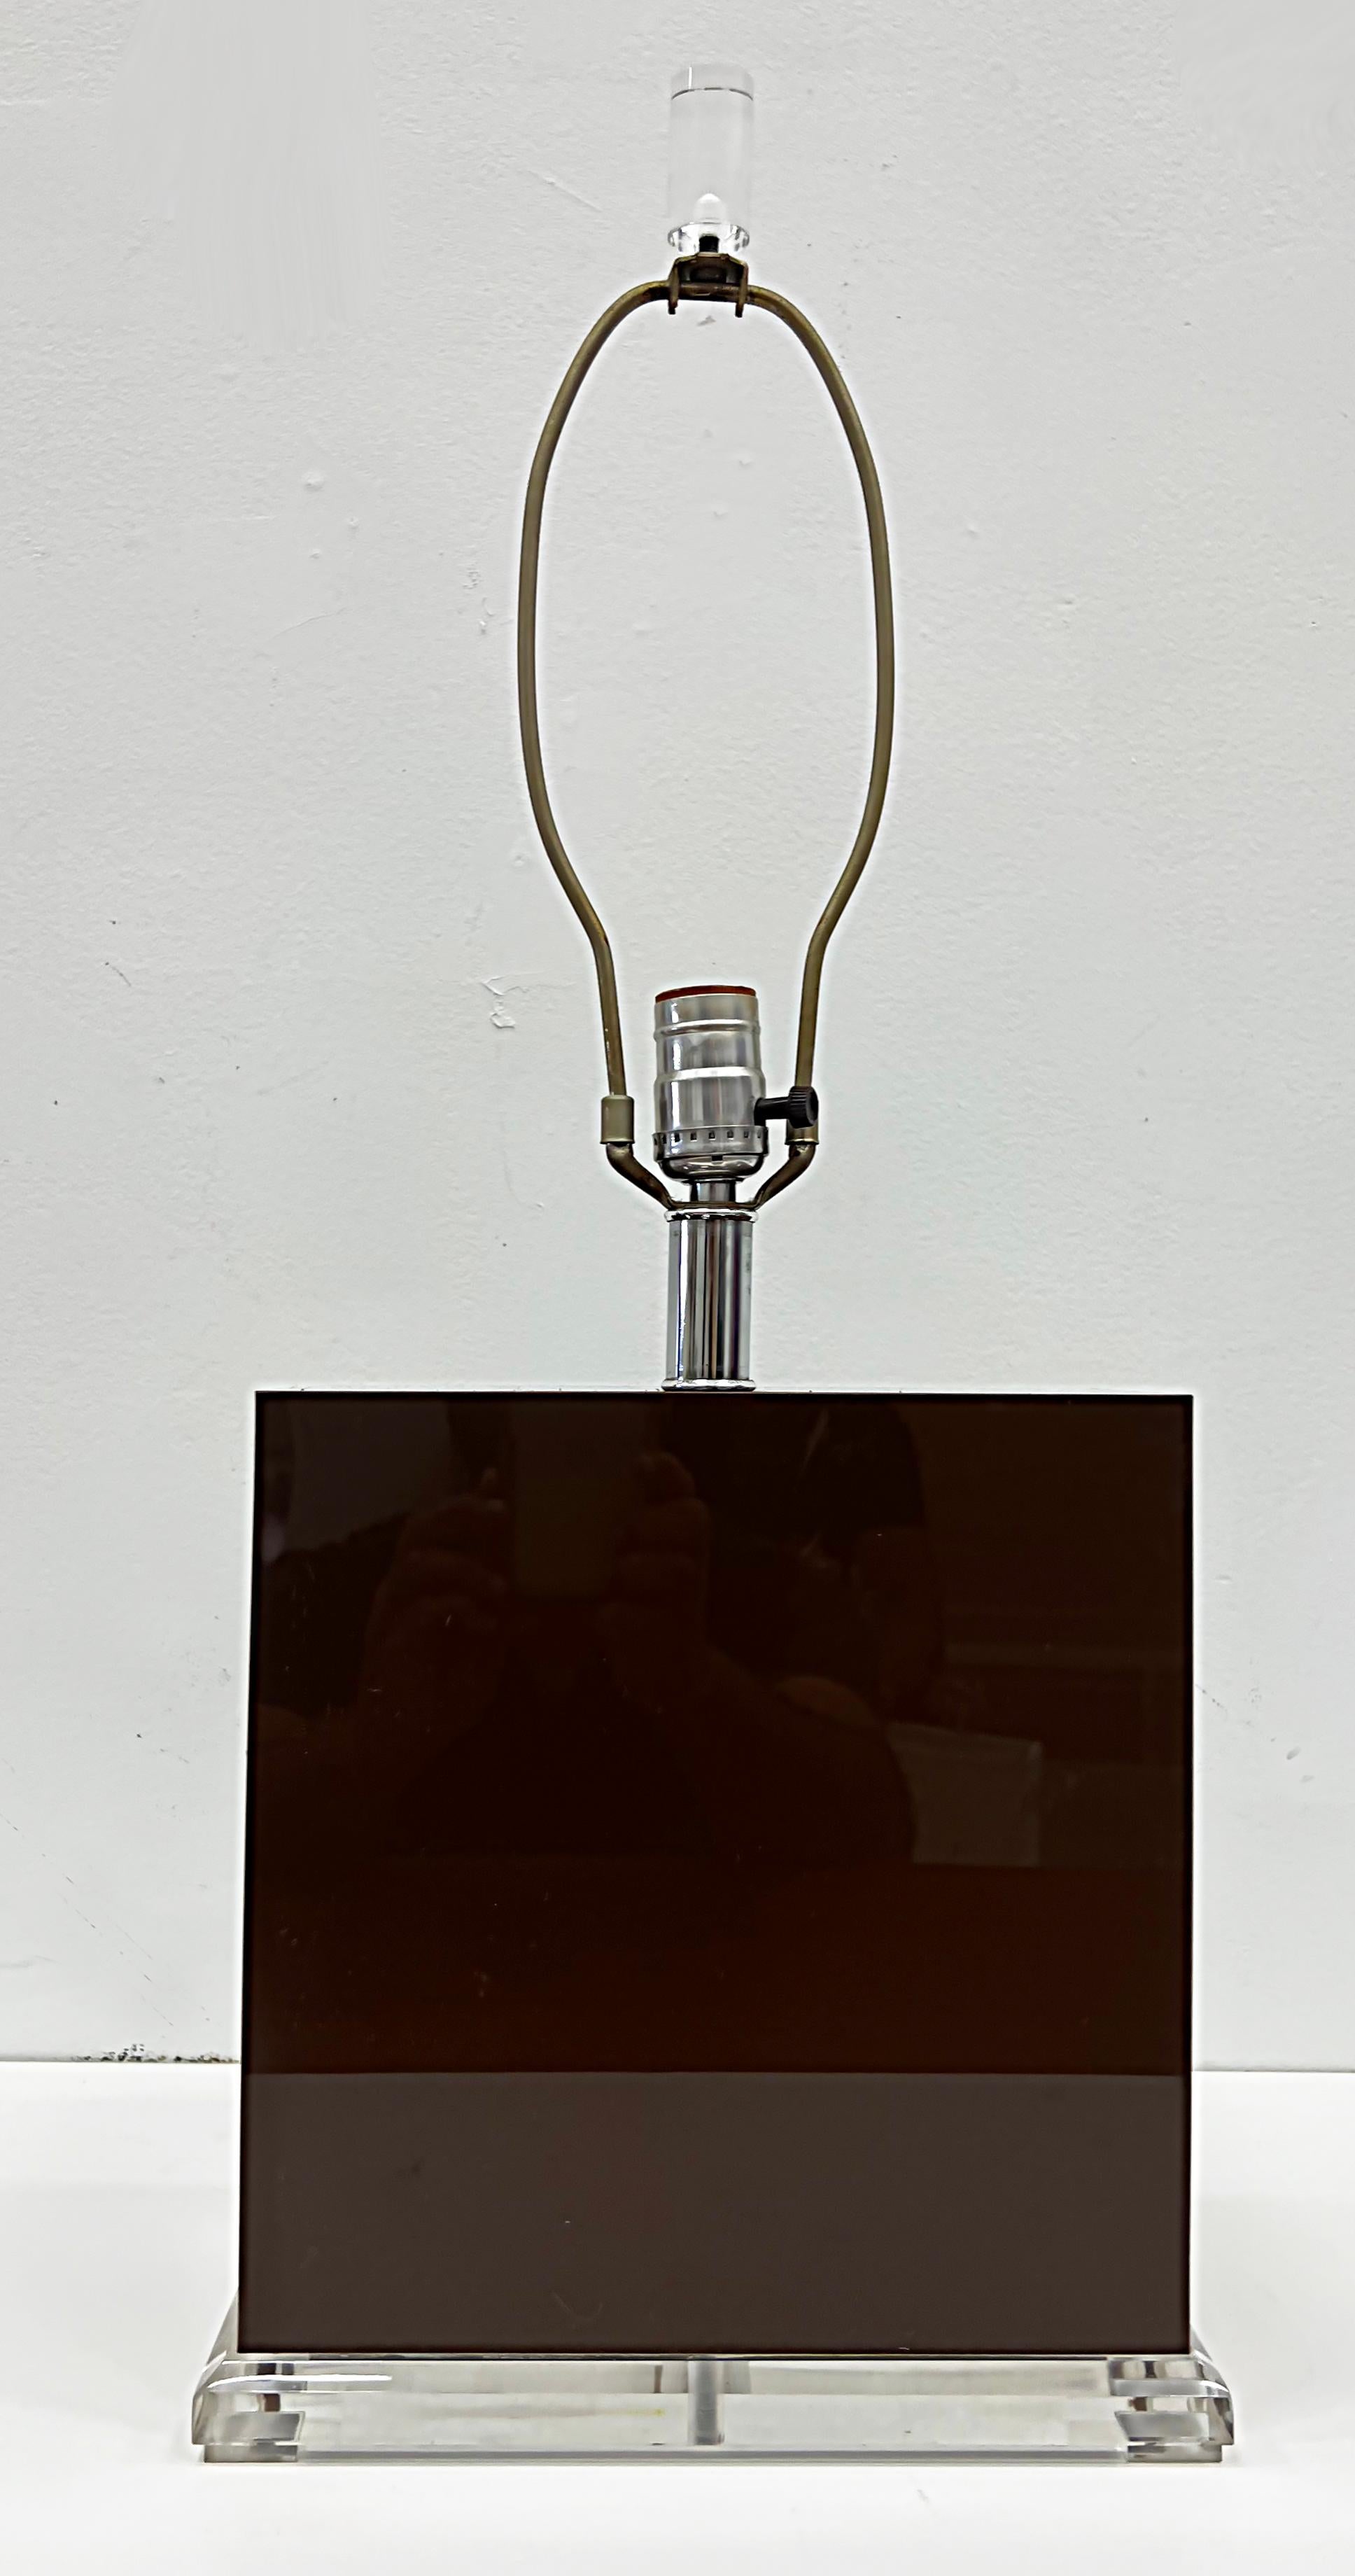 Offered for sale is a pair of 1970s chocolate brown acrylic and lucite table lamps. lamps have acrylic bodies and are presented upon Lucite bases. They have chrome fittings and Lucite finials. Each lamp accommodates a standard US light bulb and they